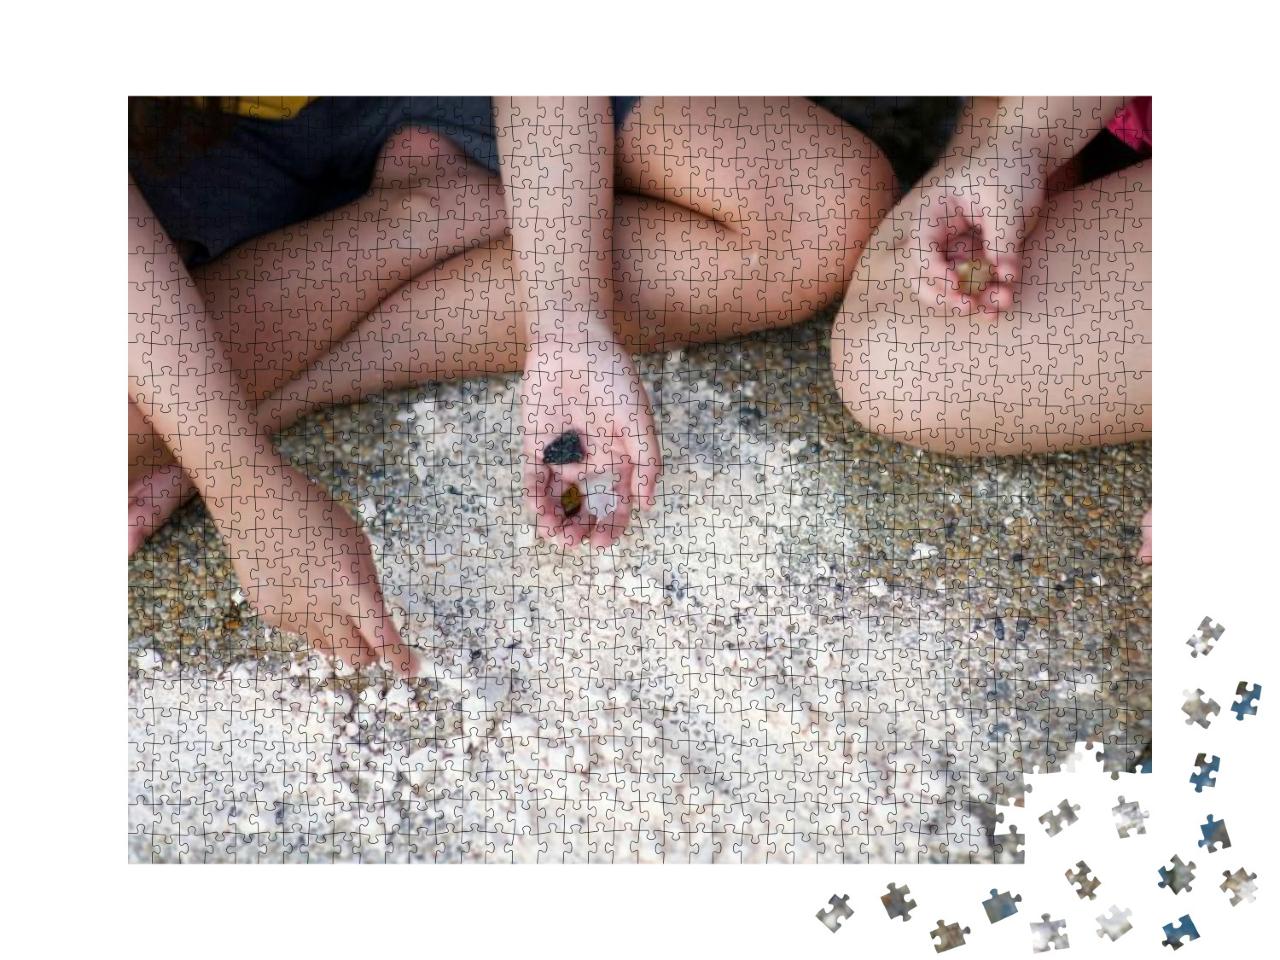 Childs Hand Holding Crystal Rock. Mining Science A... Jigsaw Puzzle with 1000 pieces